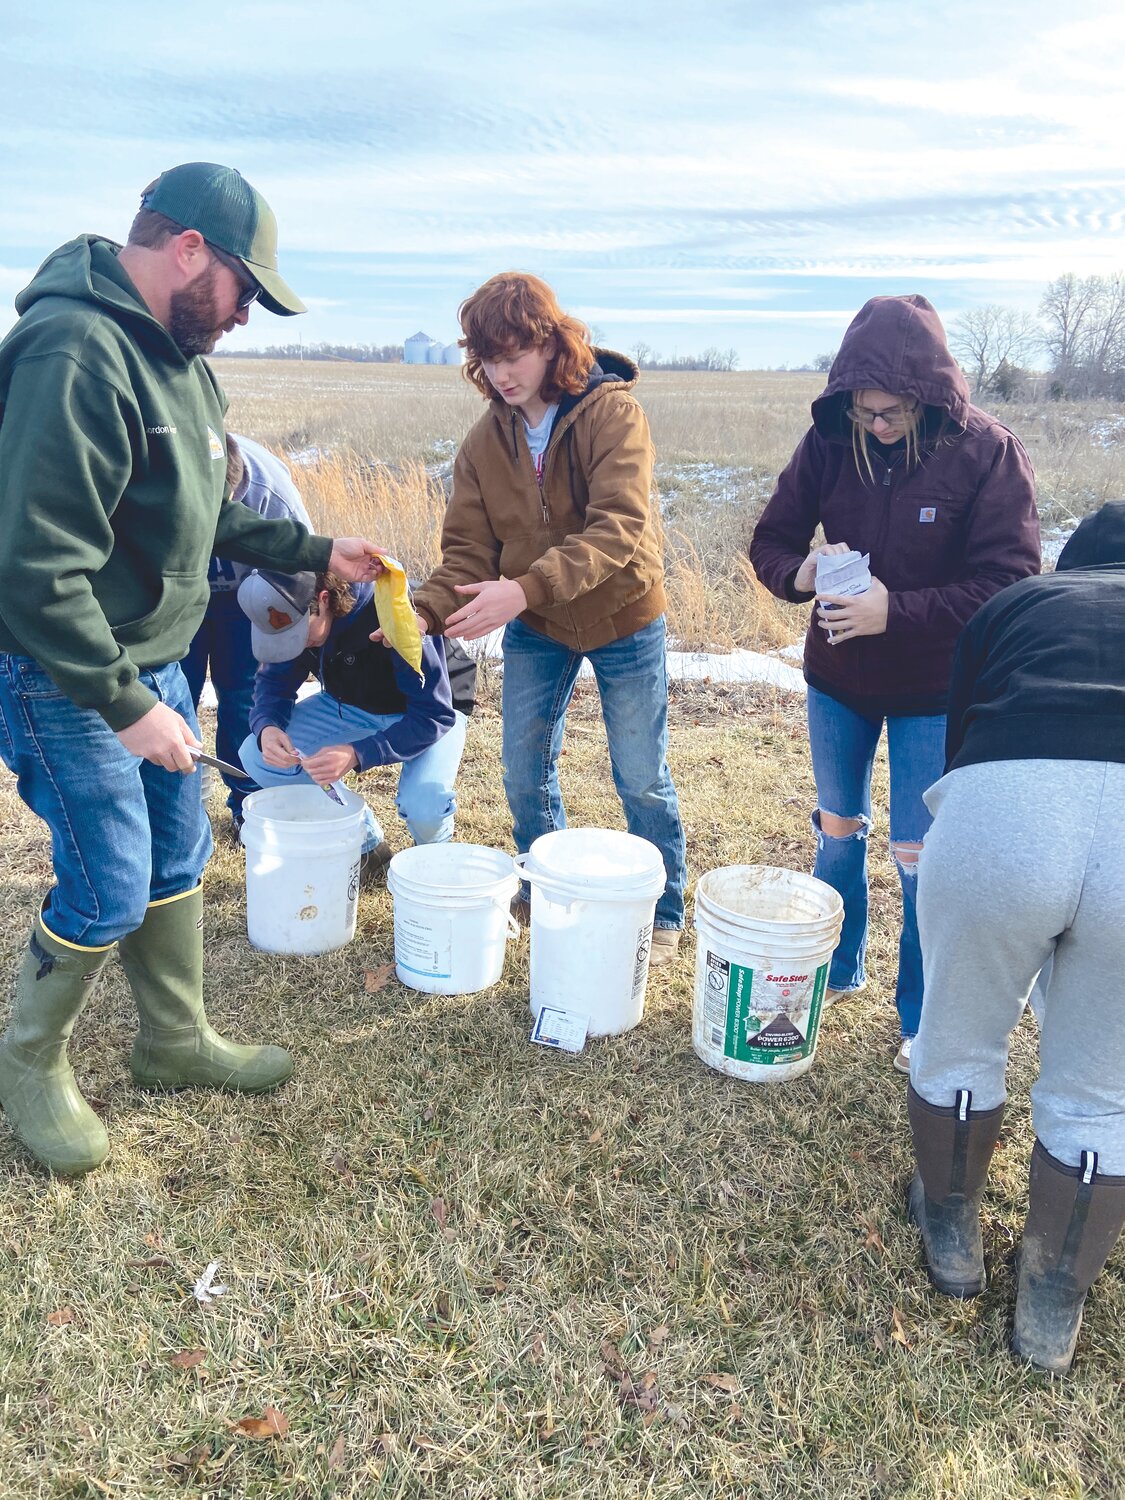 Jordan Beshears of the Missouri Department of Conservation, left, hands out seeds to junior Brayden Harris while working on the prairie project. On the right is senior Presley Schluss.